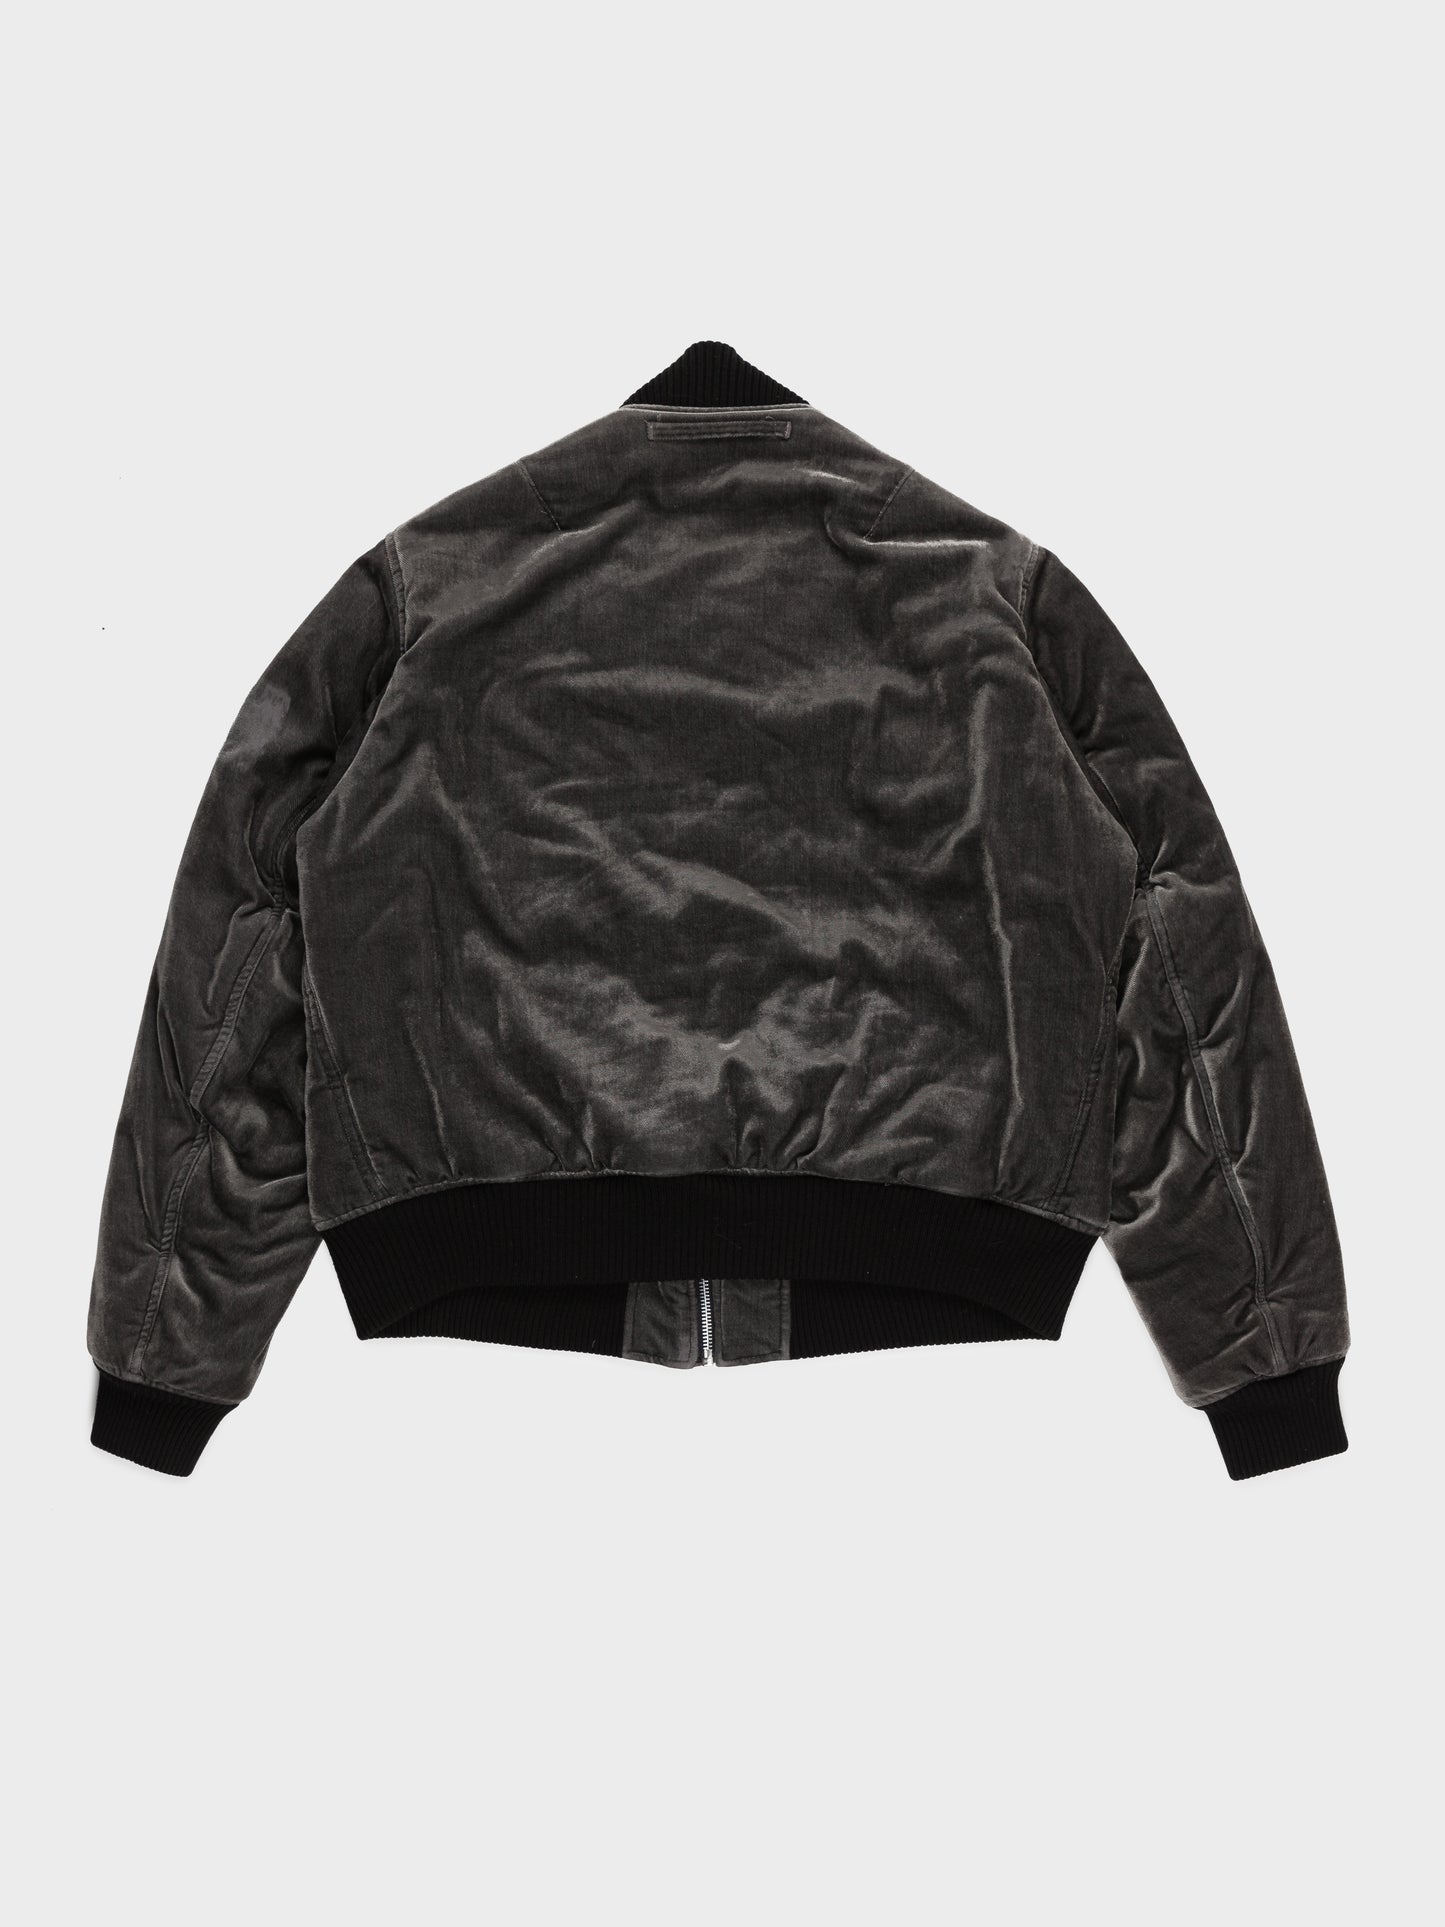 'Witch's Cell' Reversible Velour Groupie Bomber